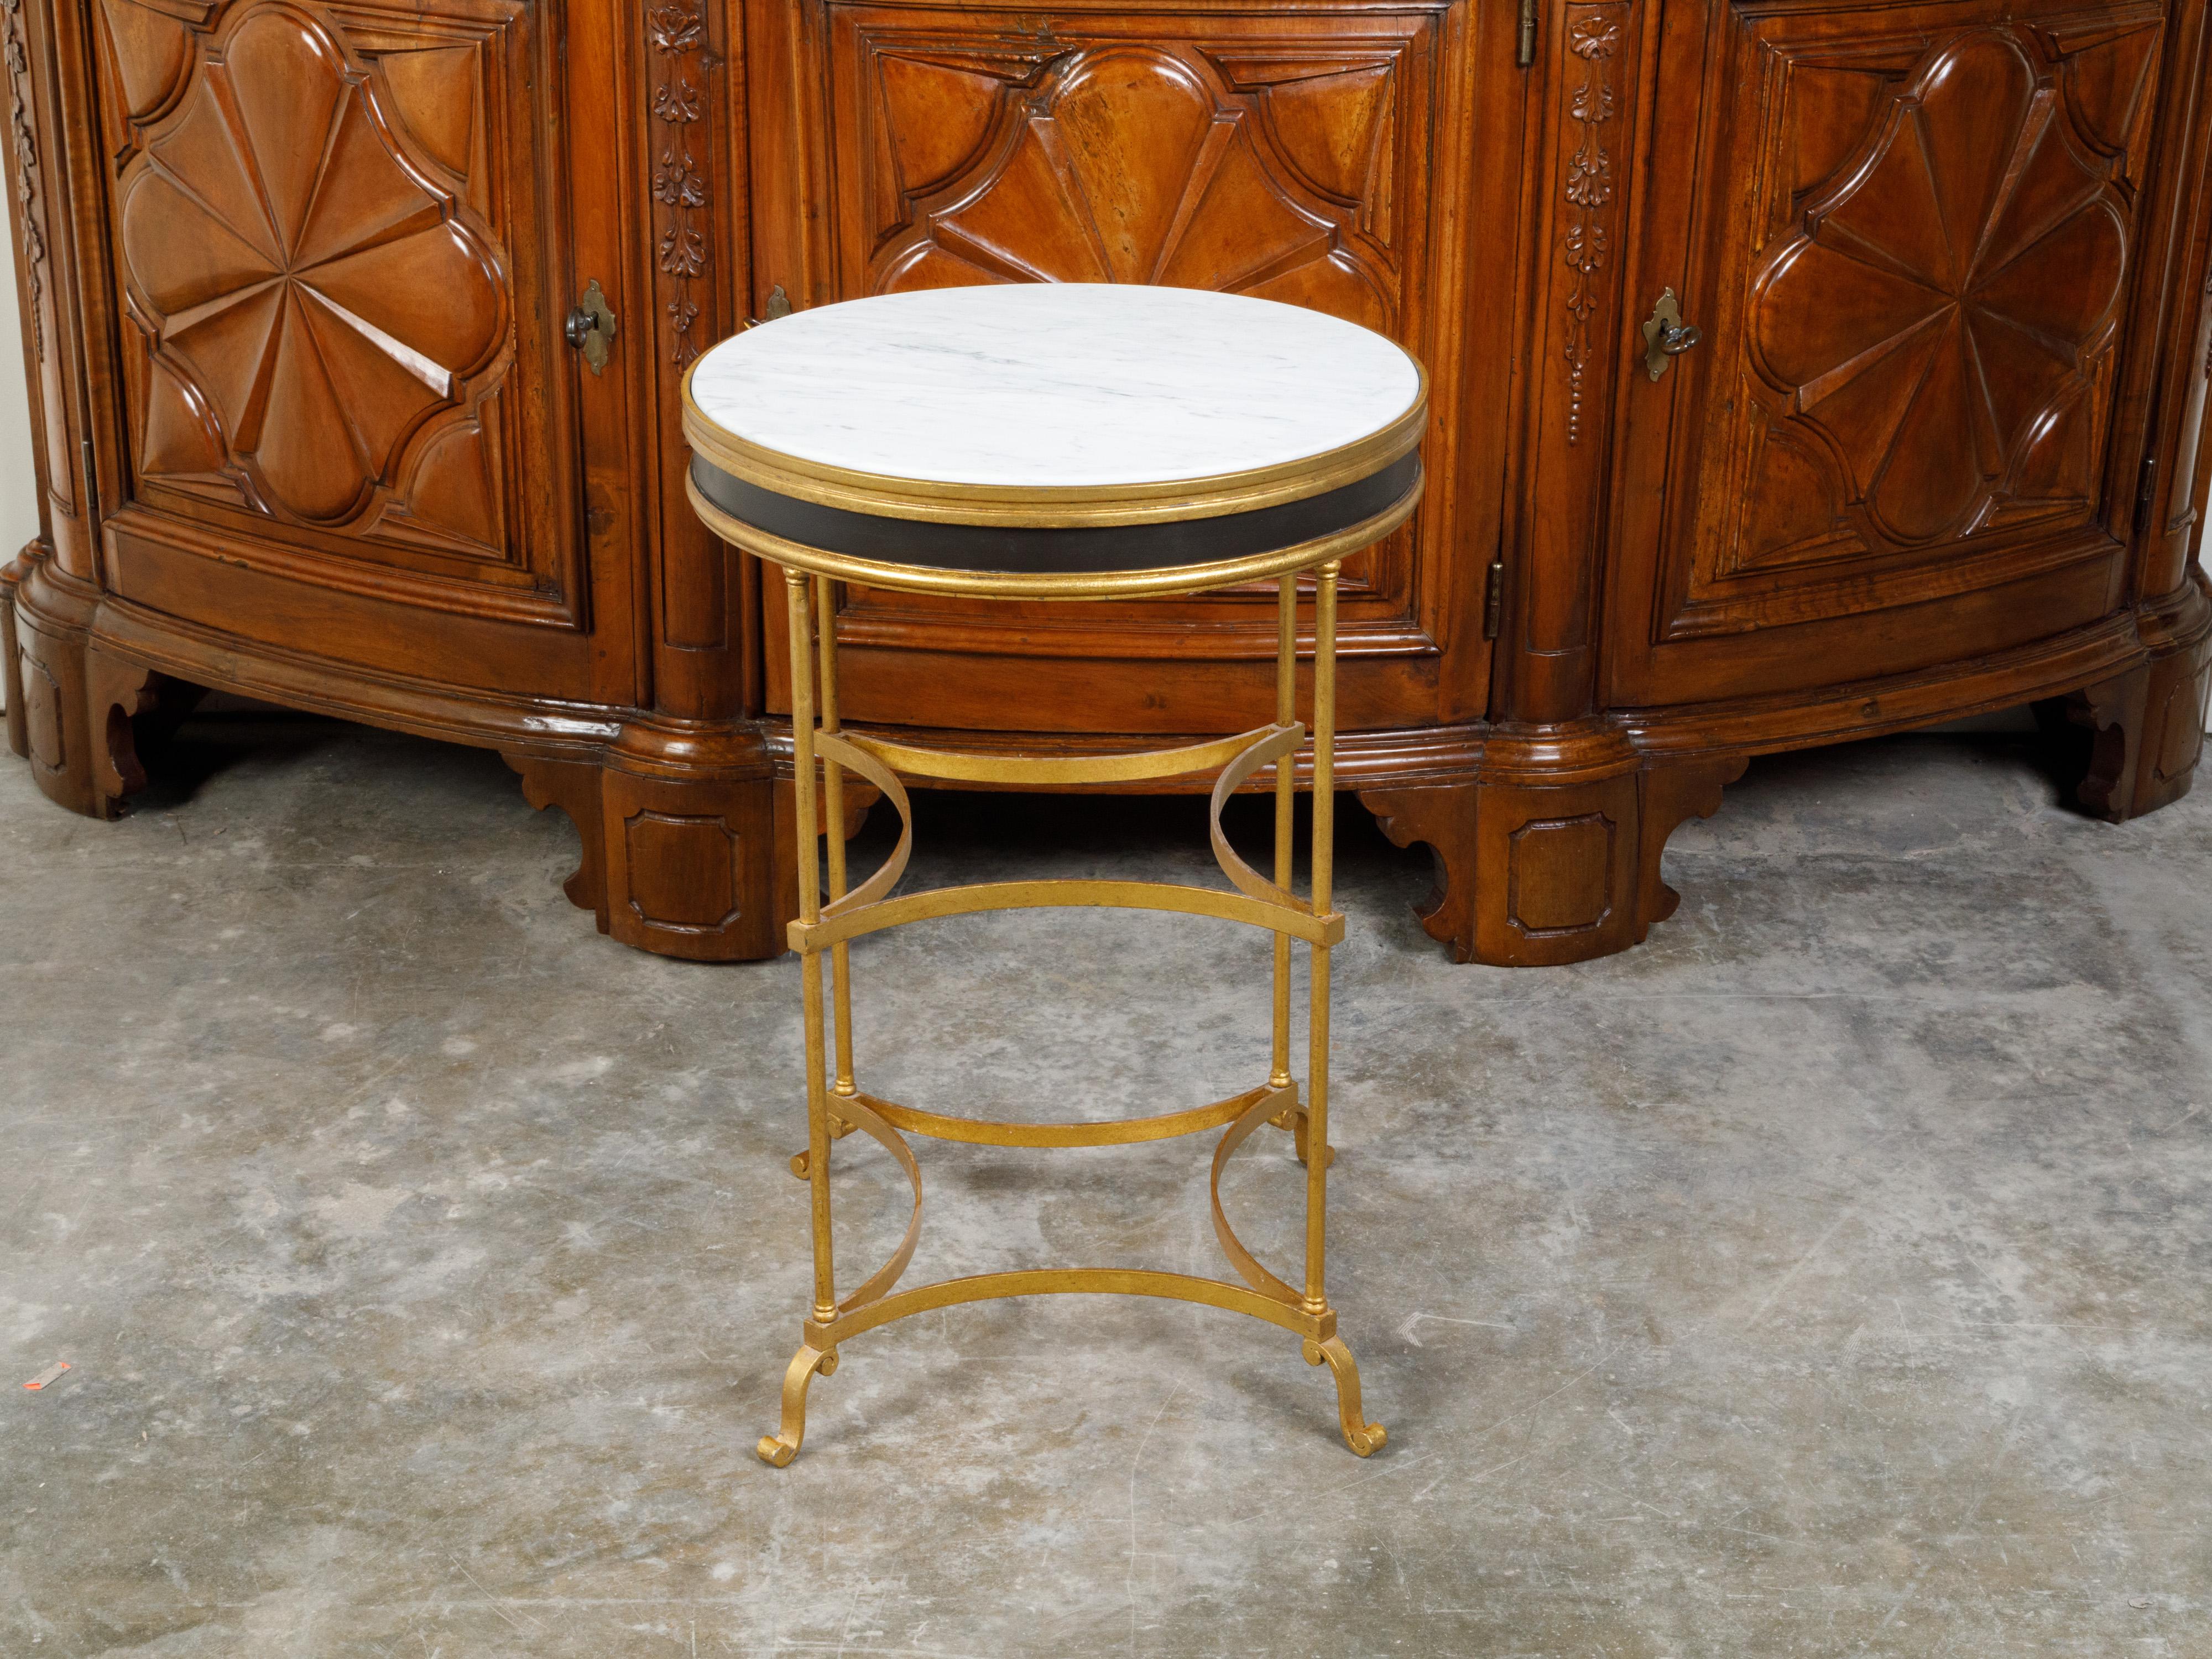 An Italian gilt metal side table from the mid 20th century, with white marble top and in-curving accents. Created in Italy during the Midcentury period, this side table features a circular white marble top secured within a gilt metal apron